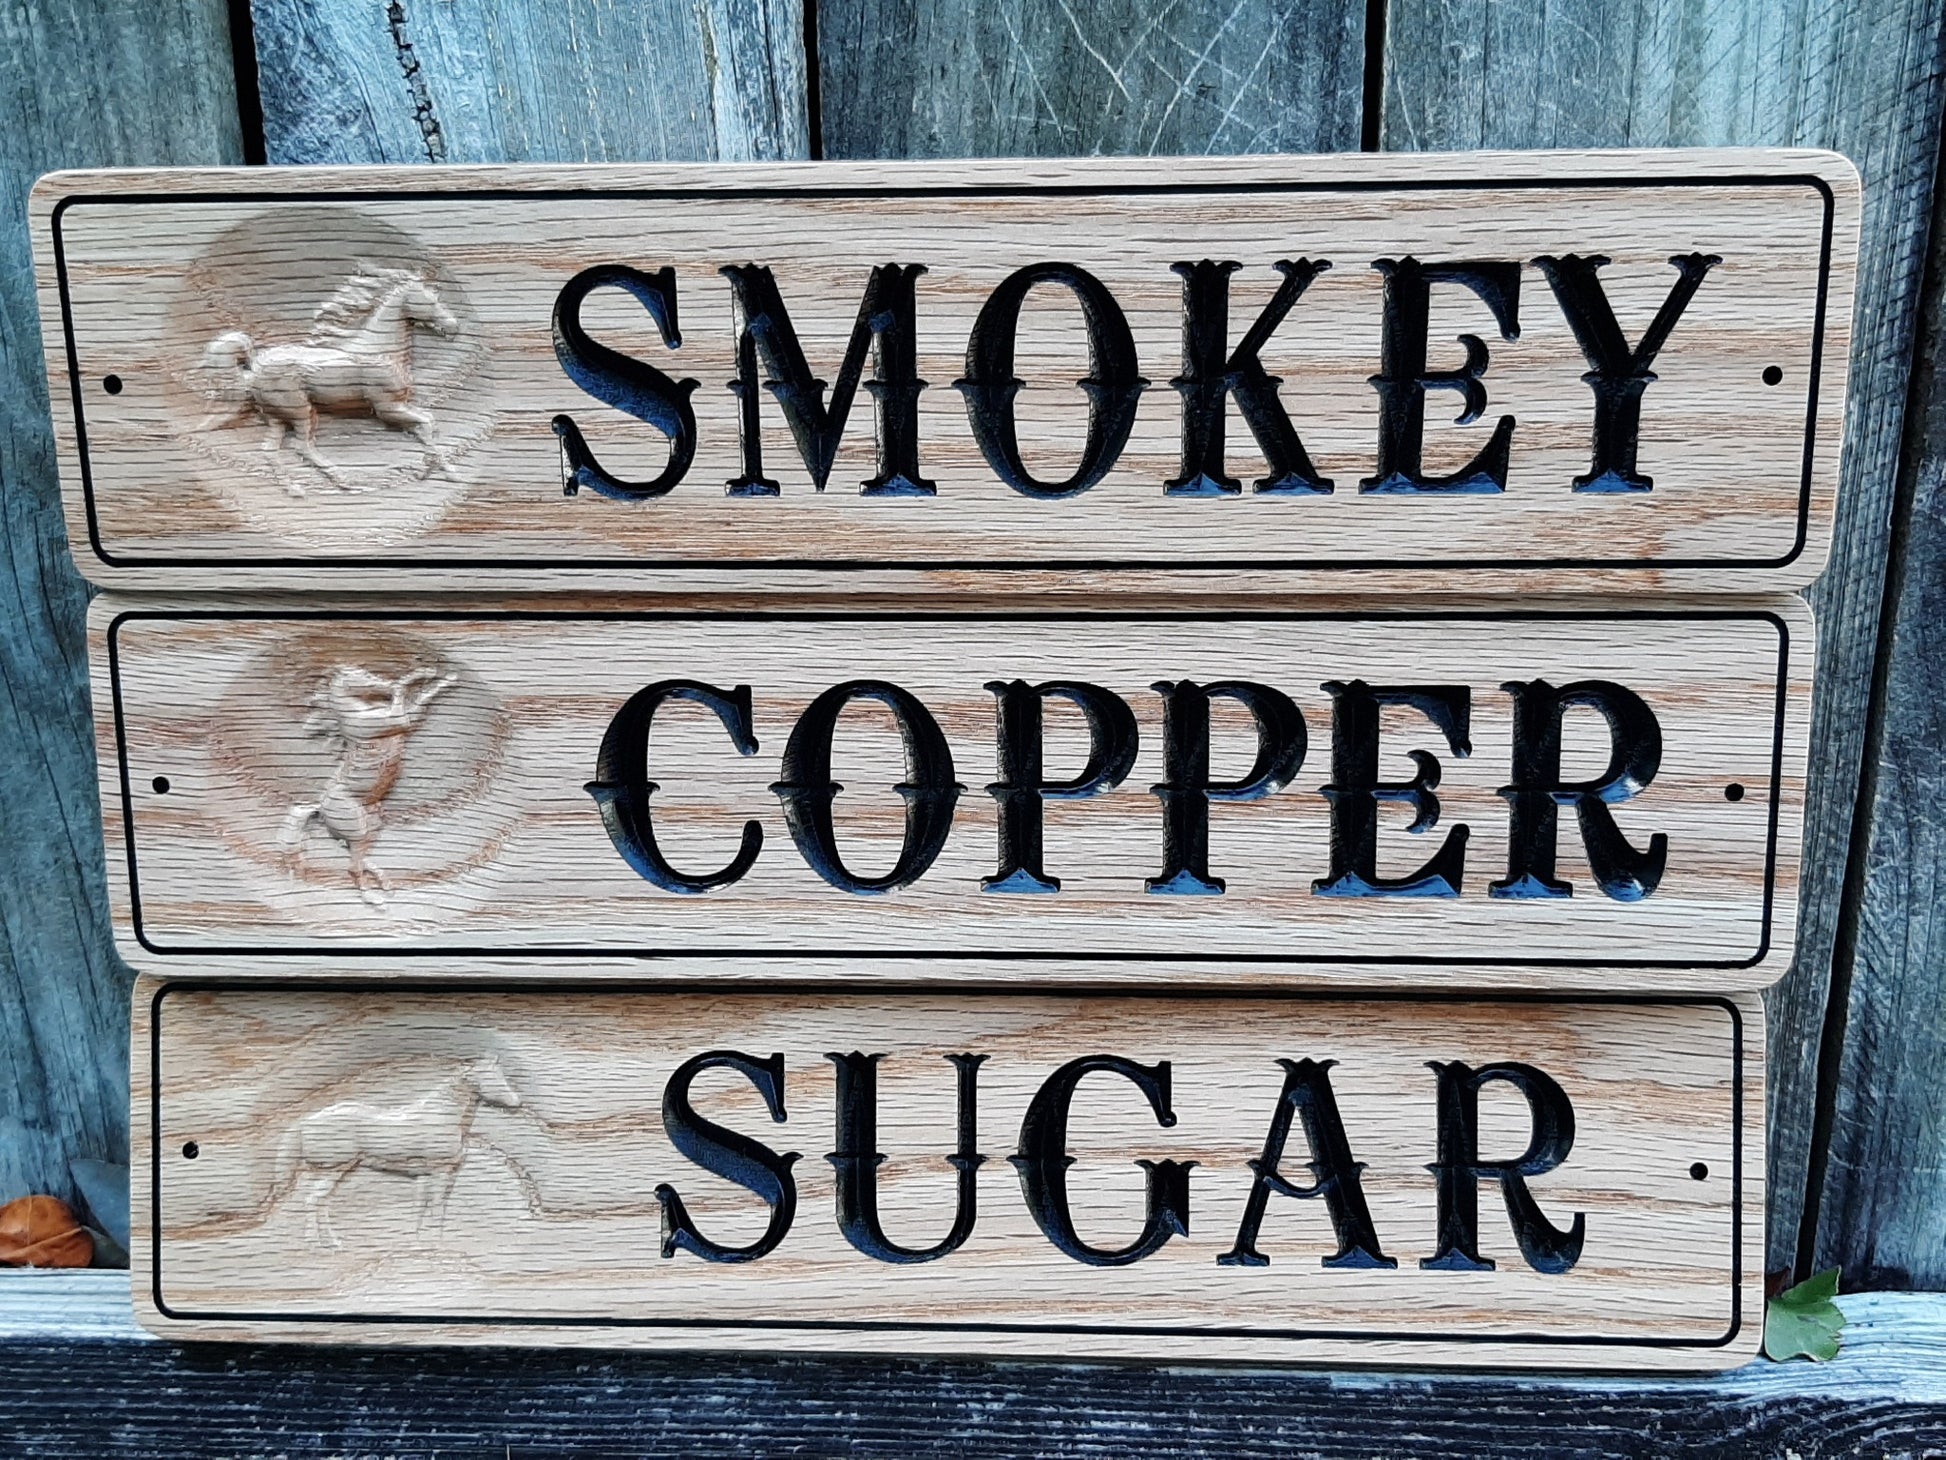 Custom made matching horse stall signs